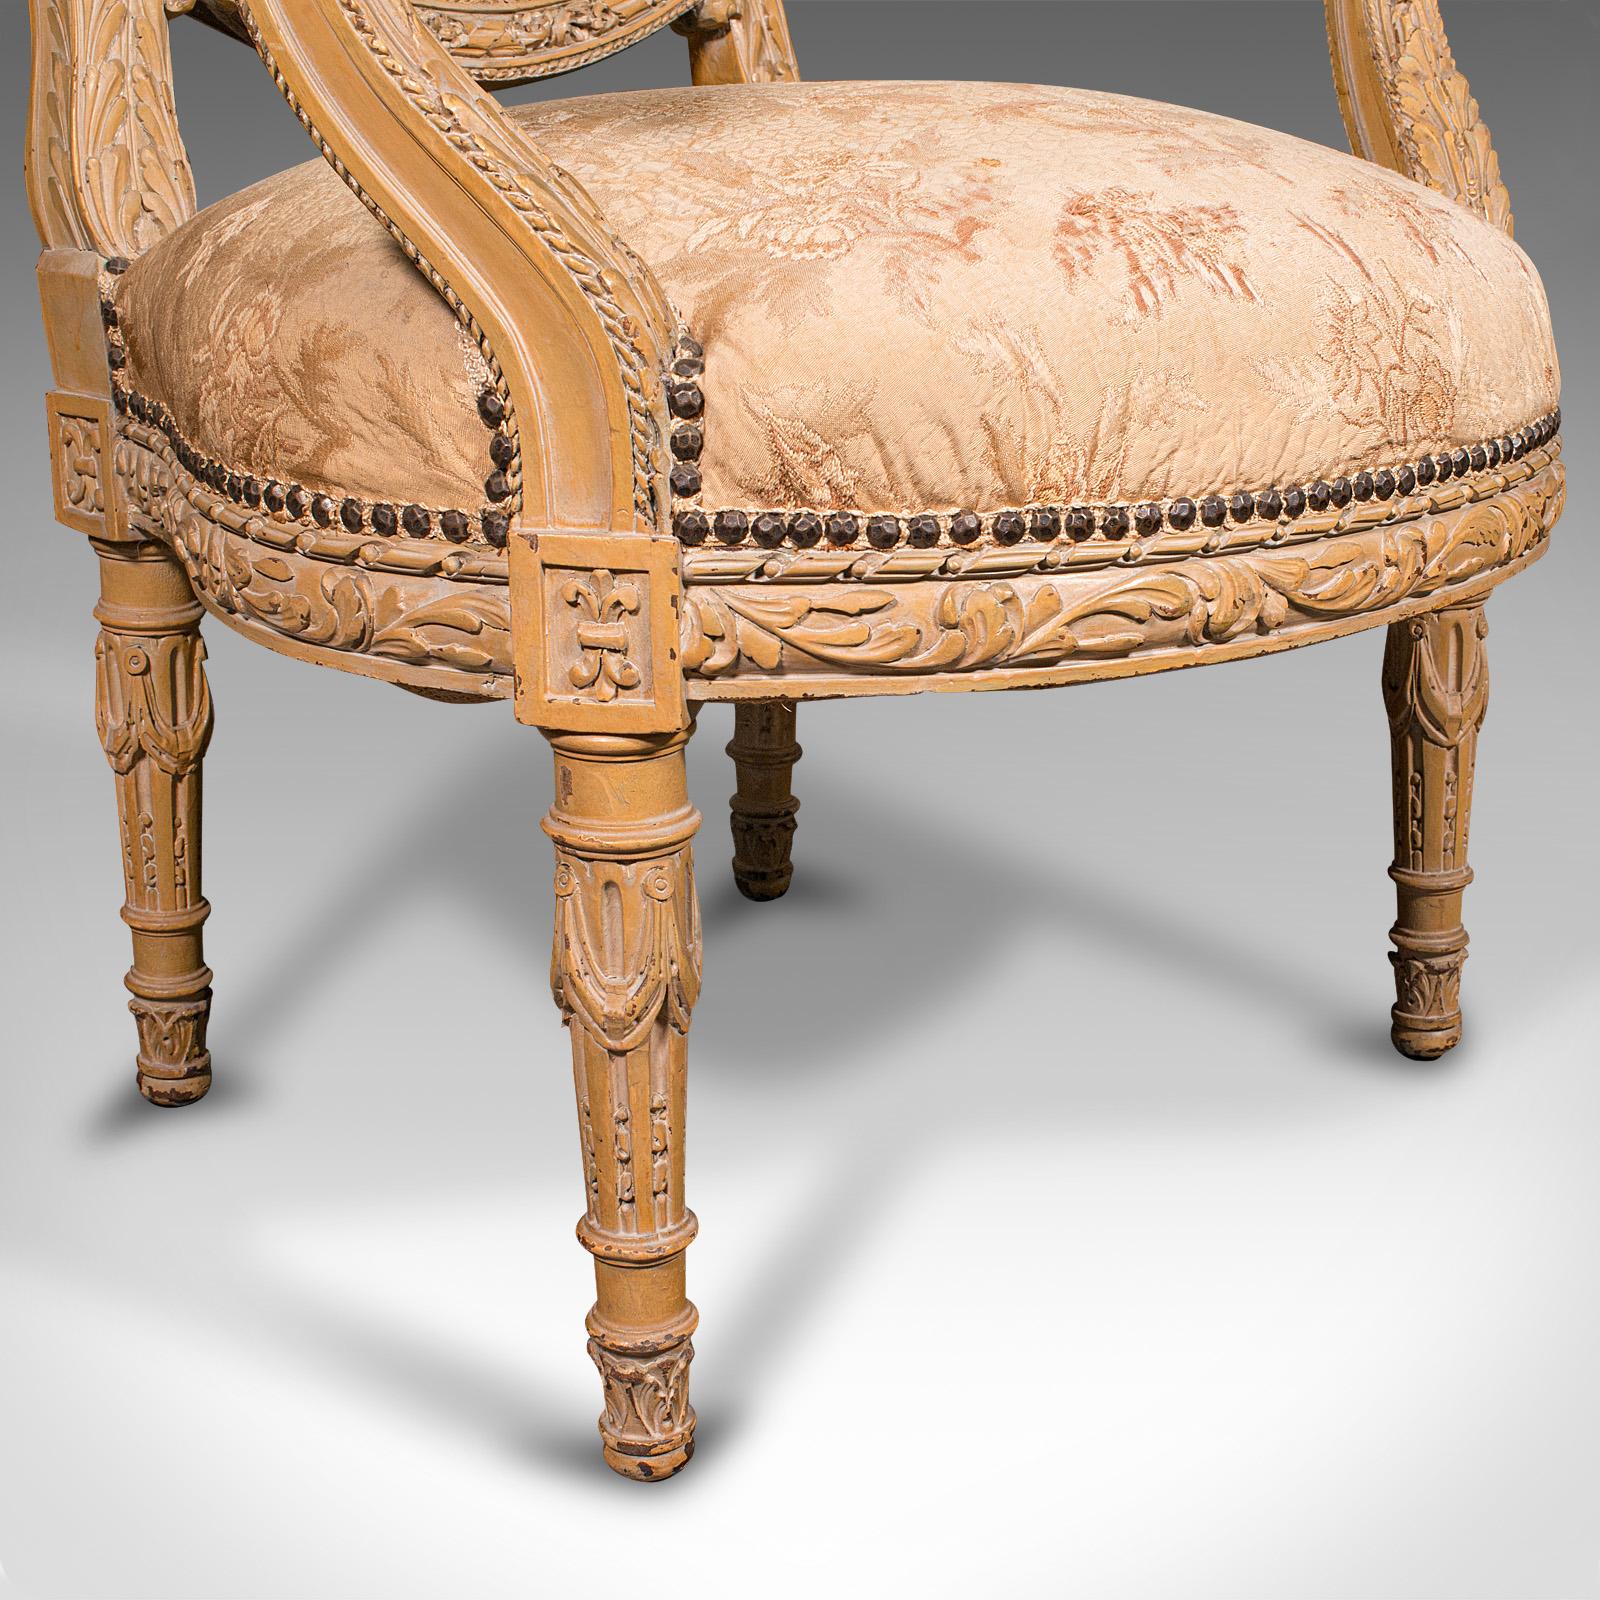 Antique Carved Armchair, French, Show Frame, Fauteuil Chair, Victorian, C.1870 For Sale 7